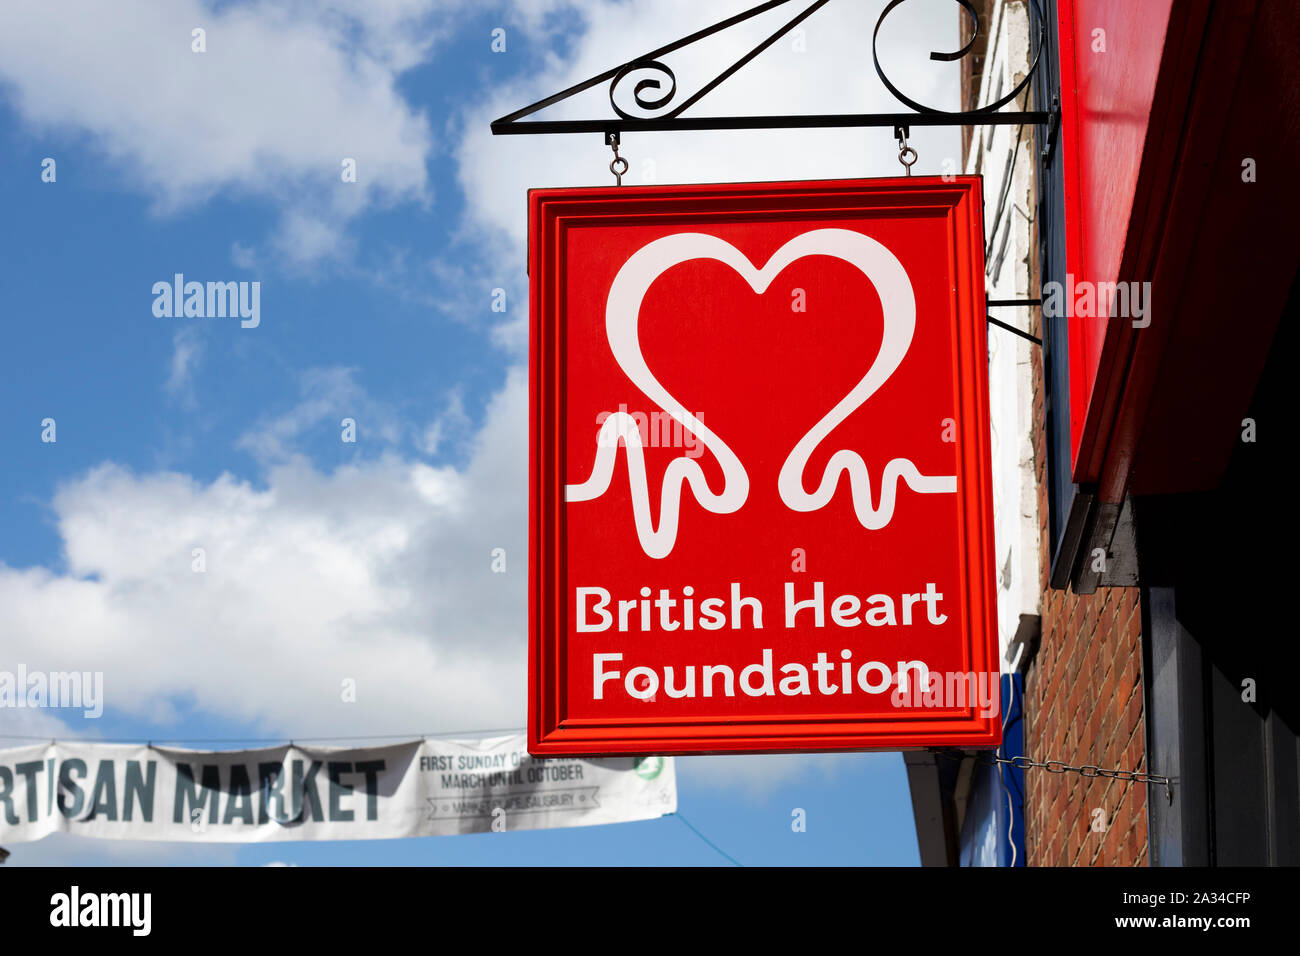 British Heart Foundation sign over charity shop, UK charity campaigns aimed to prevent heart diseases Stock Photo